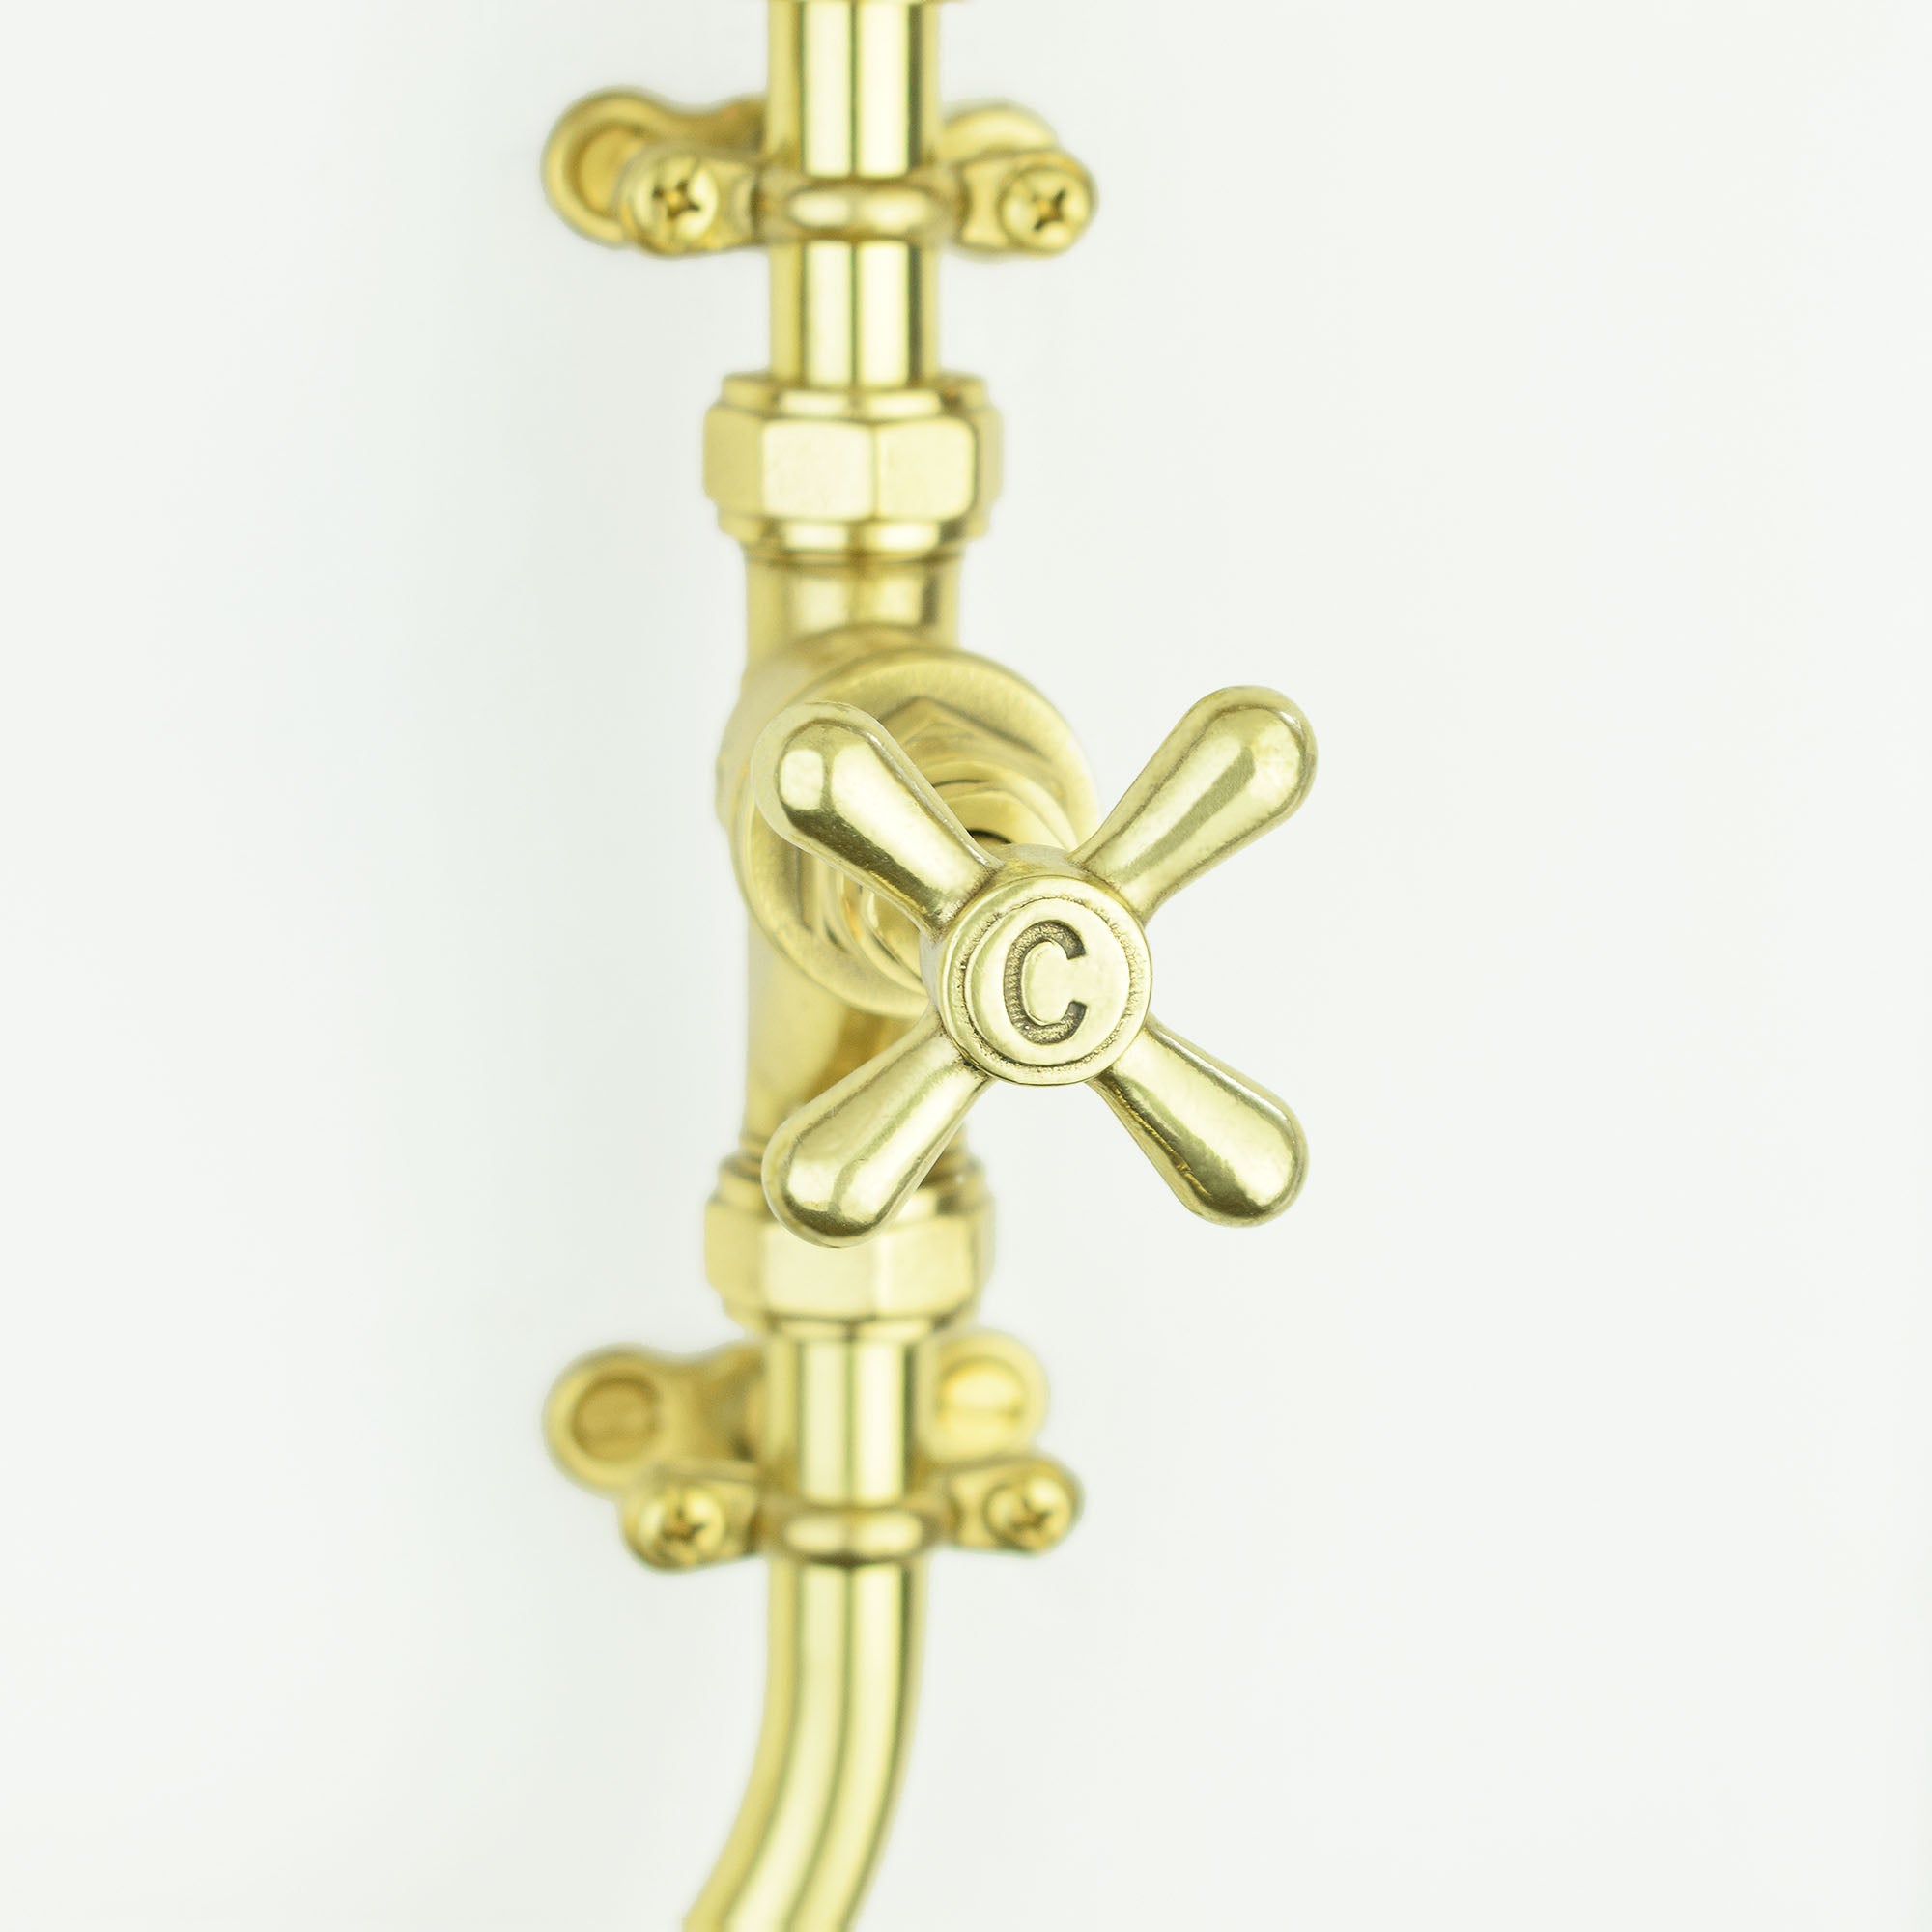 Fully brass wall mounted tap with cross head tap head